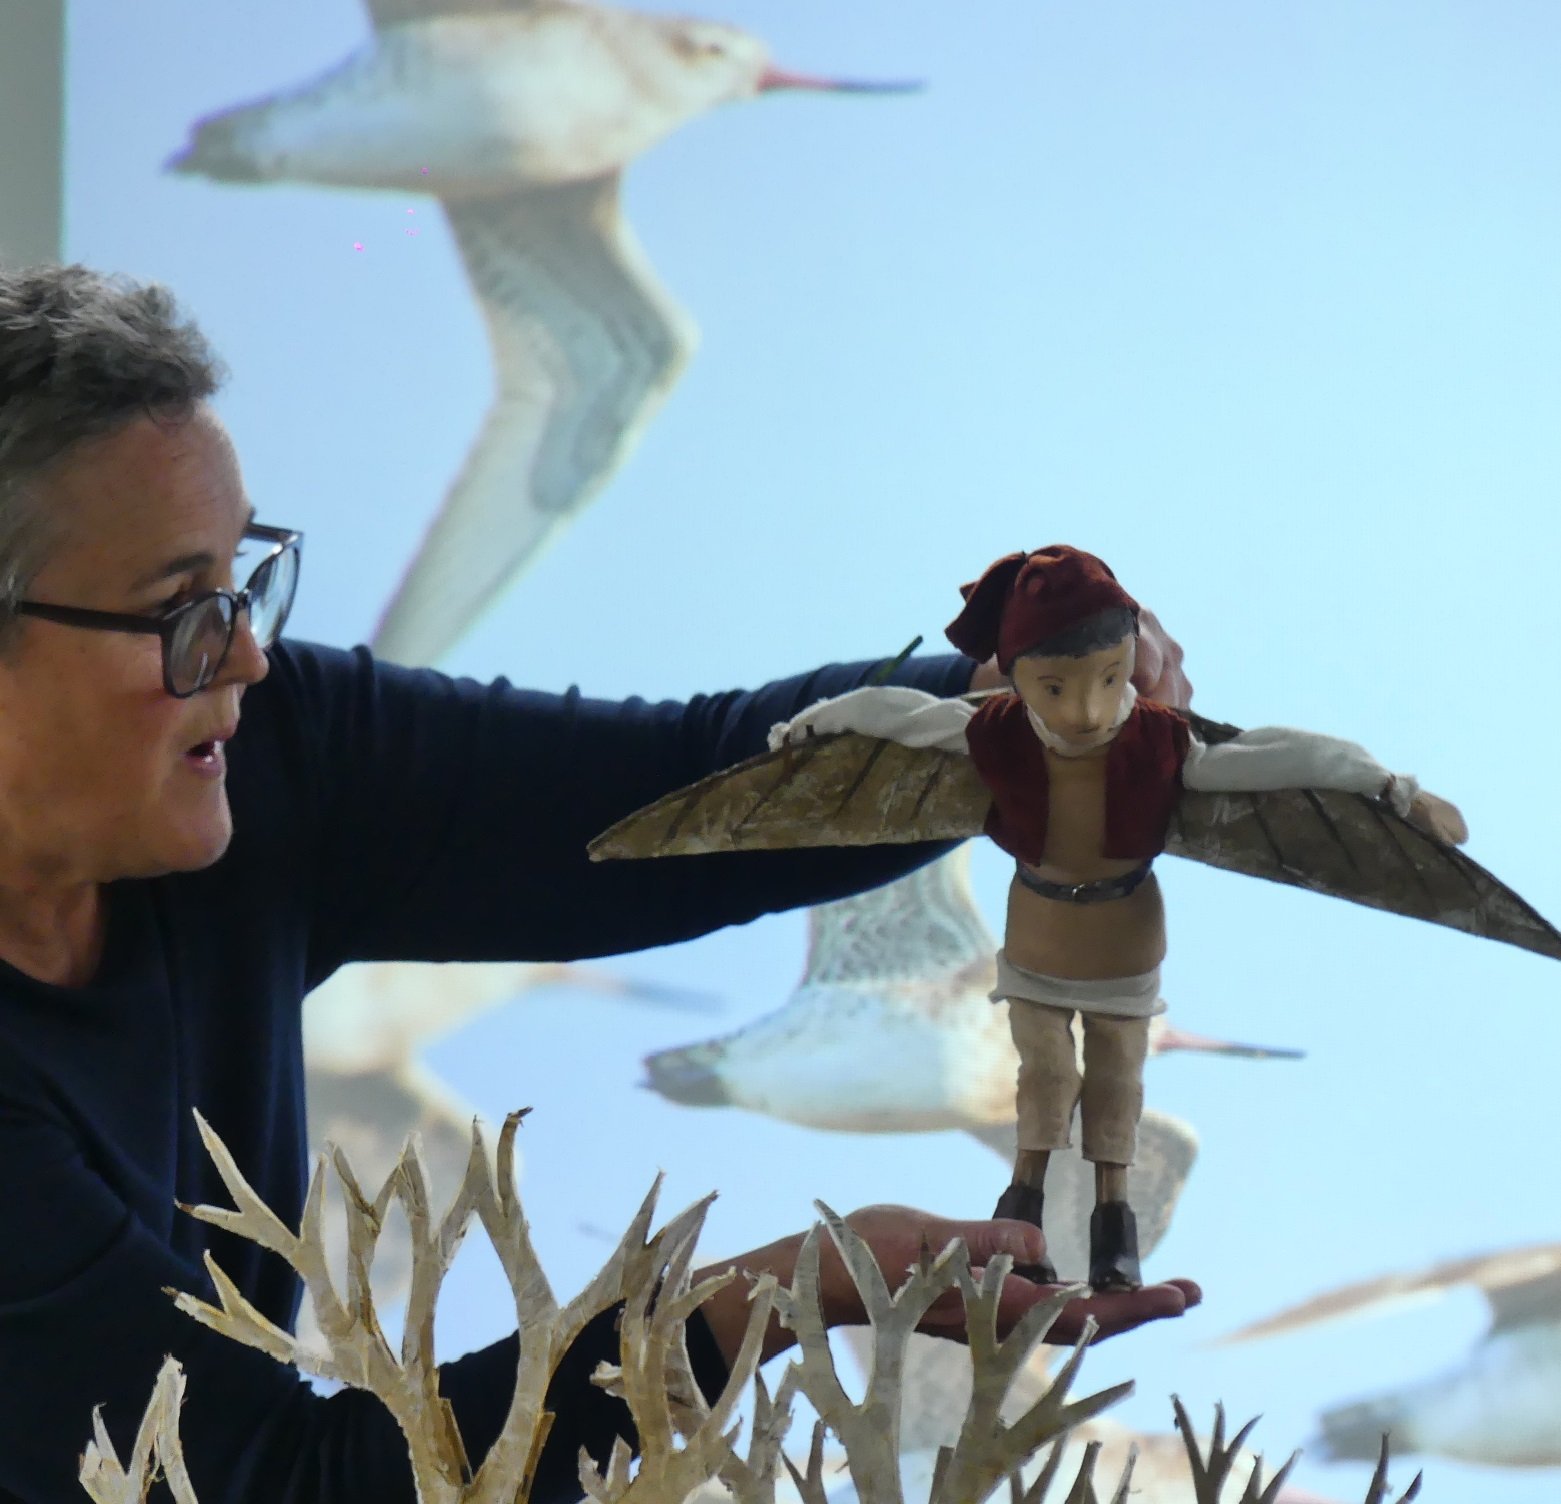 Bridget Sanders helps Jack fly in The Boy with Wings puppet show.